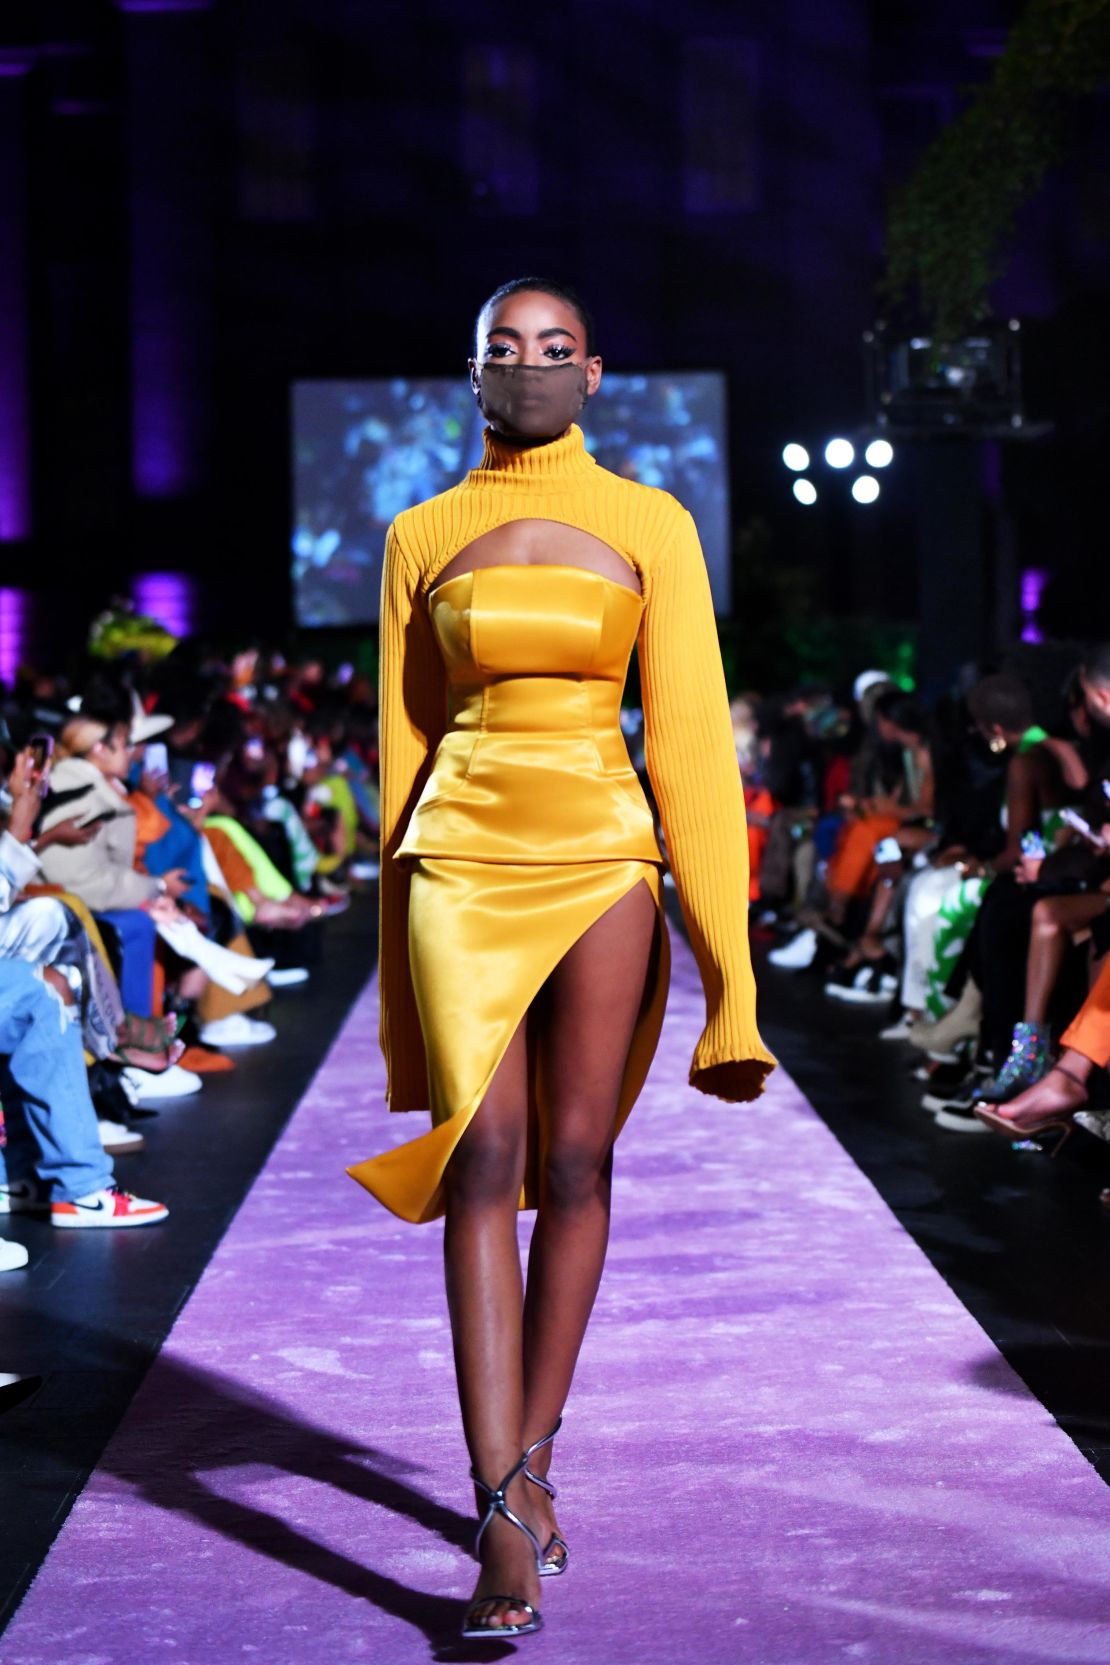 Mvuemba, who is Congolese, is heavily influenced by African culture and design, but she says she didn't want to be labeled as an African designer because of inequity.